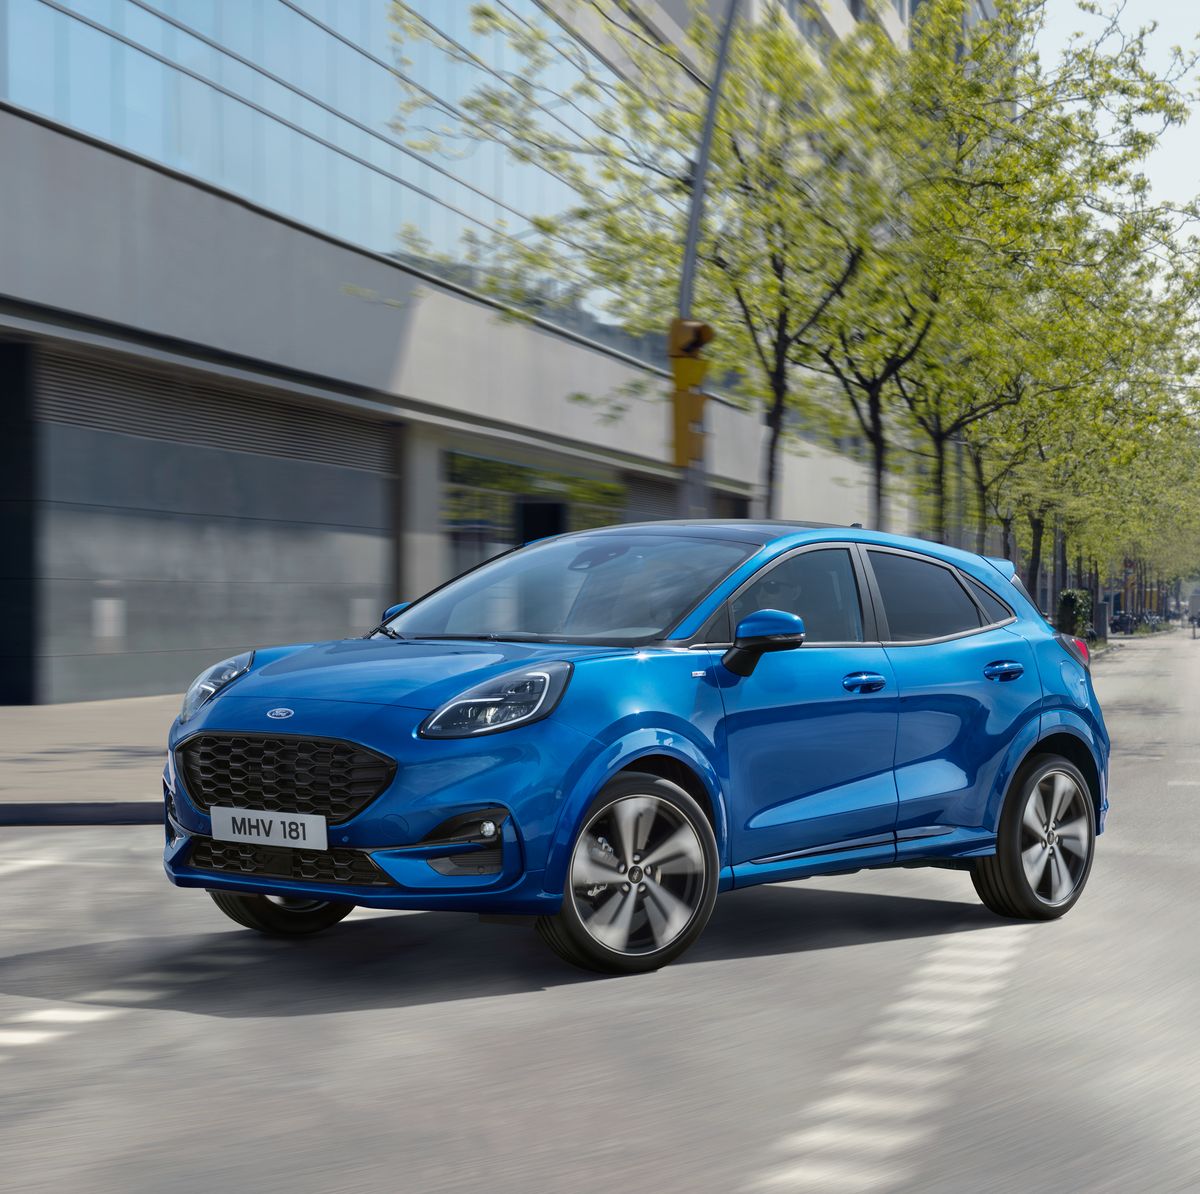 2020 Ford Puma – New Small Crossover